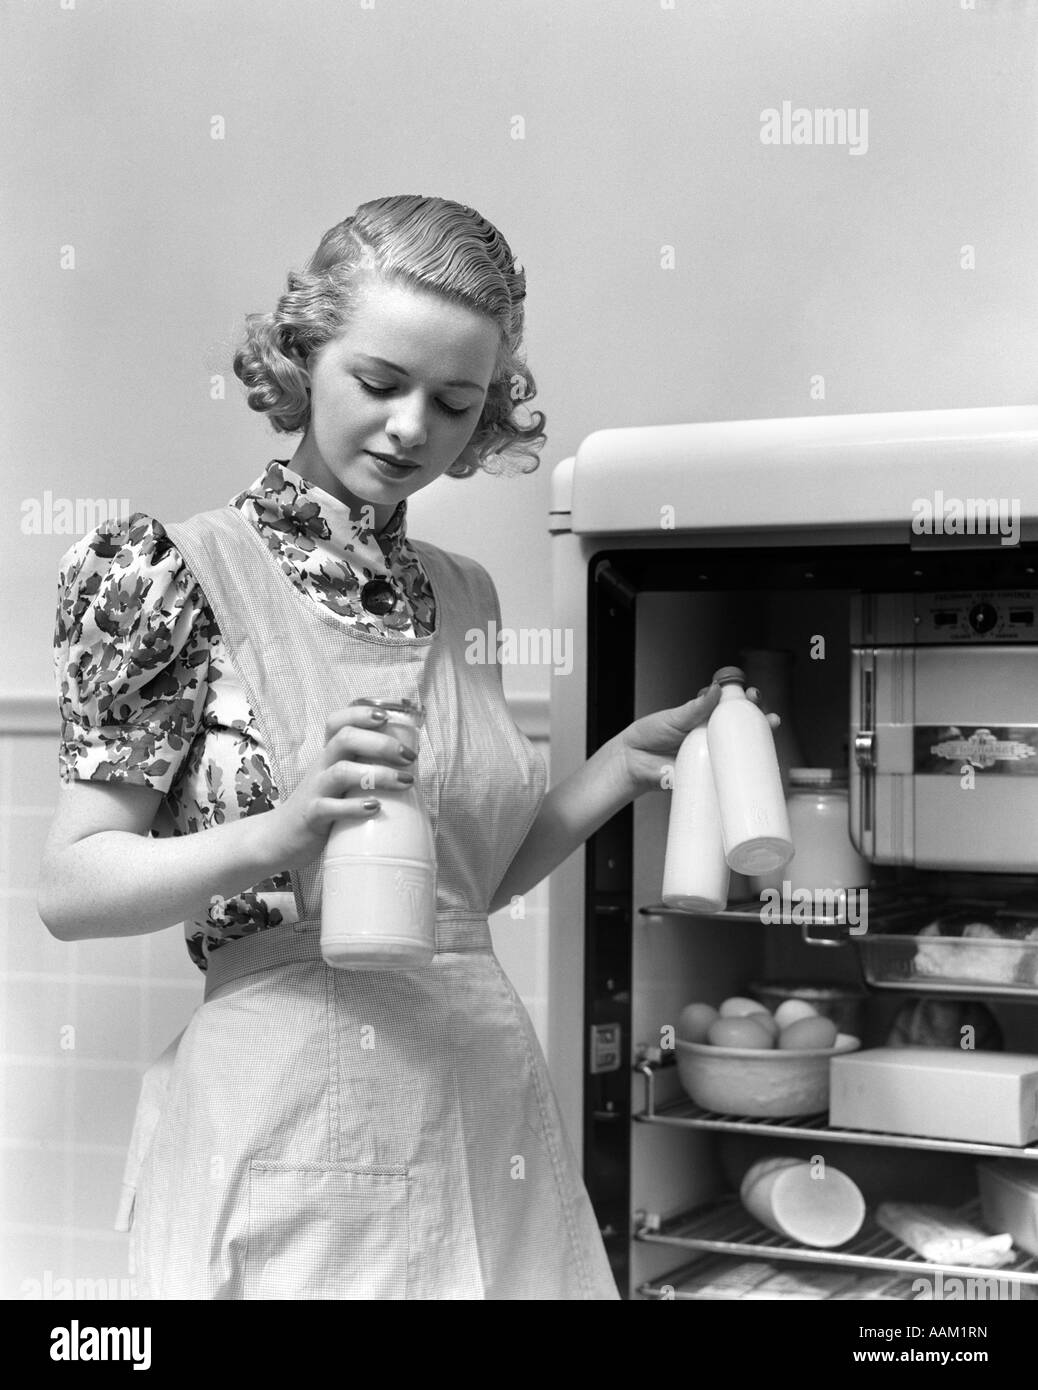 1930s WOMAN WEARING A WHITE APRON TAKING MILK OUT OF THE REFRIGERATOR Stock Photo